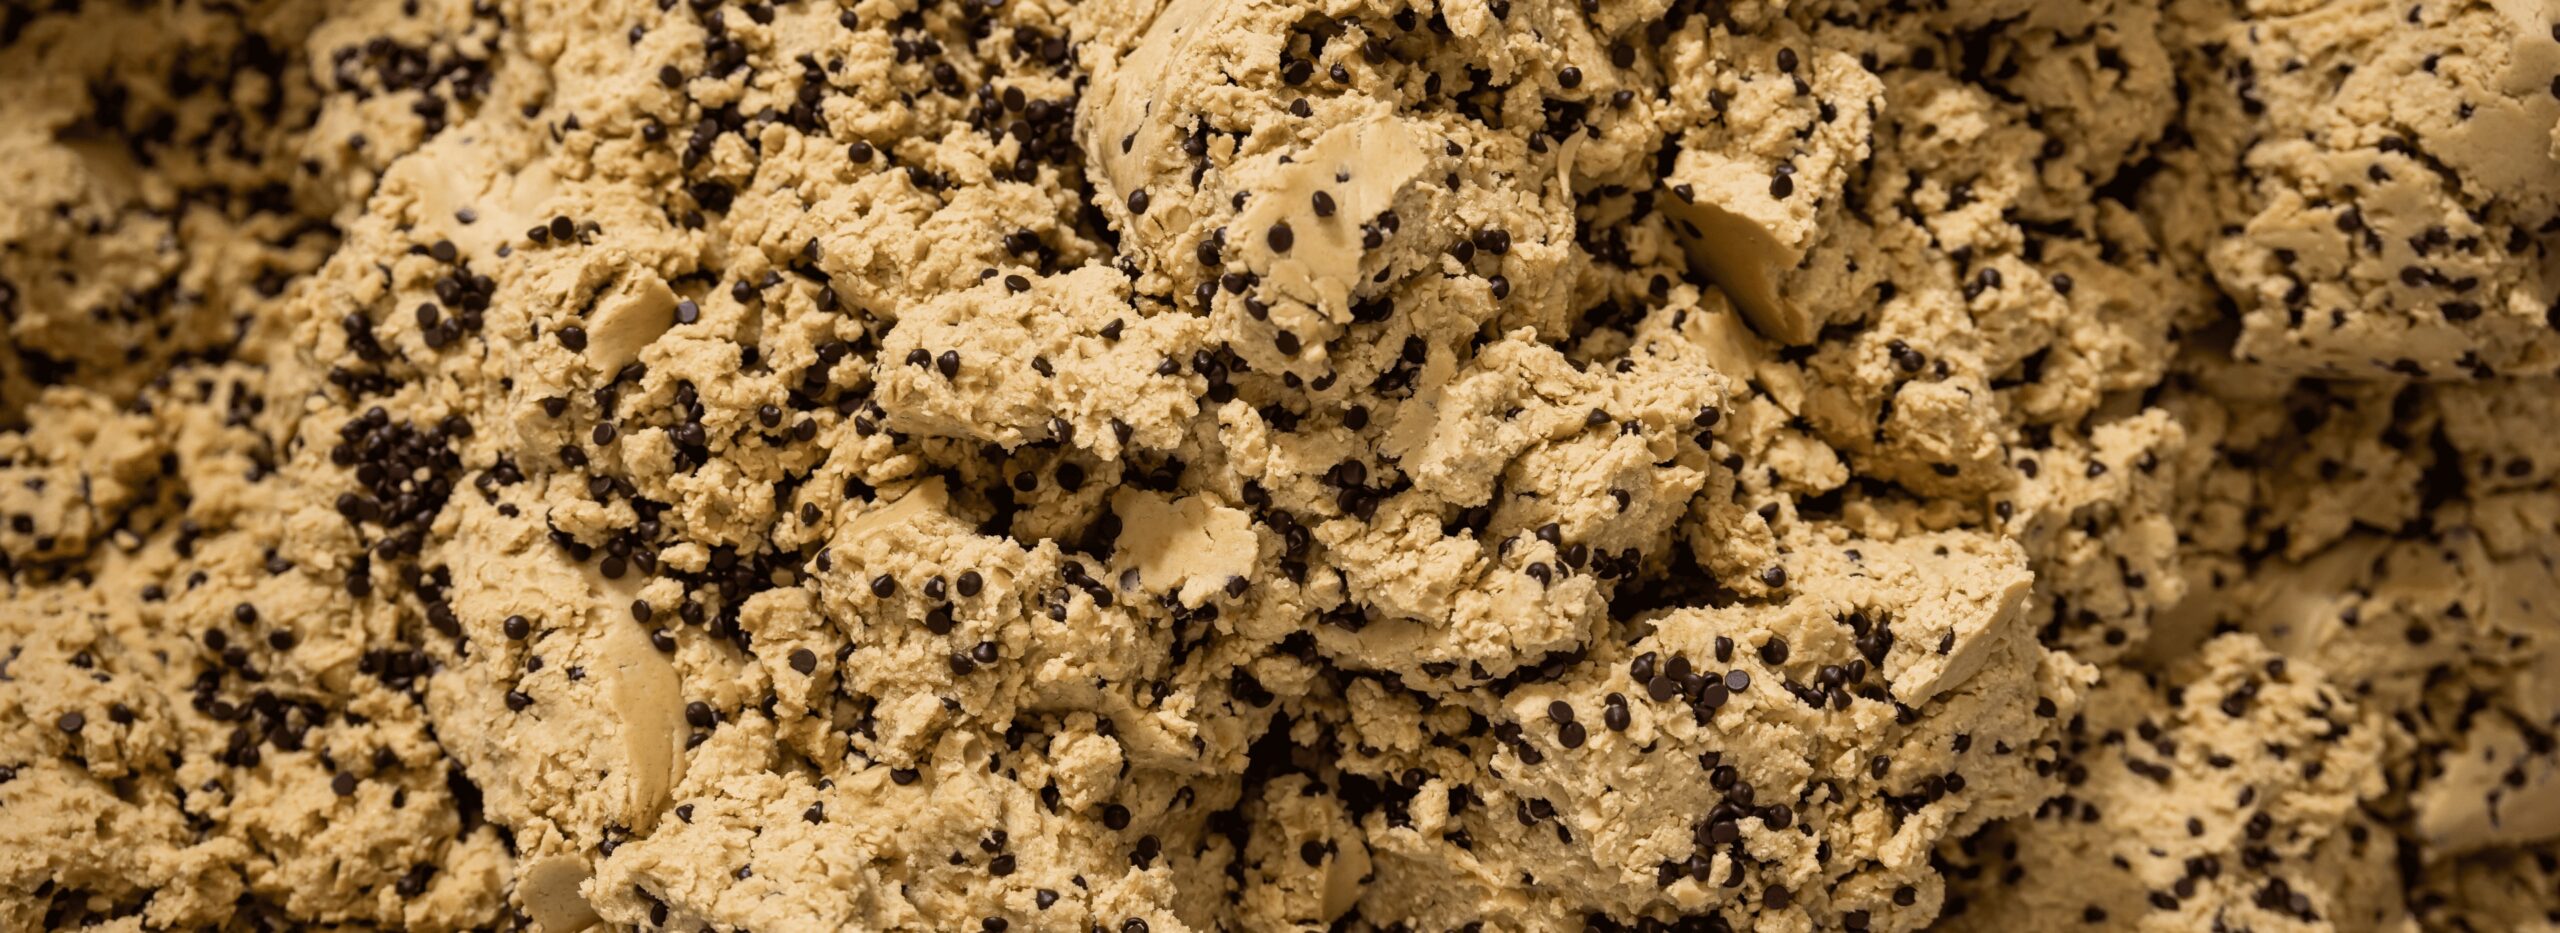 cookie dough produced by commercial bakeries